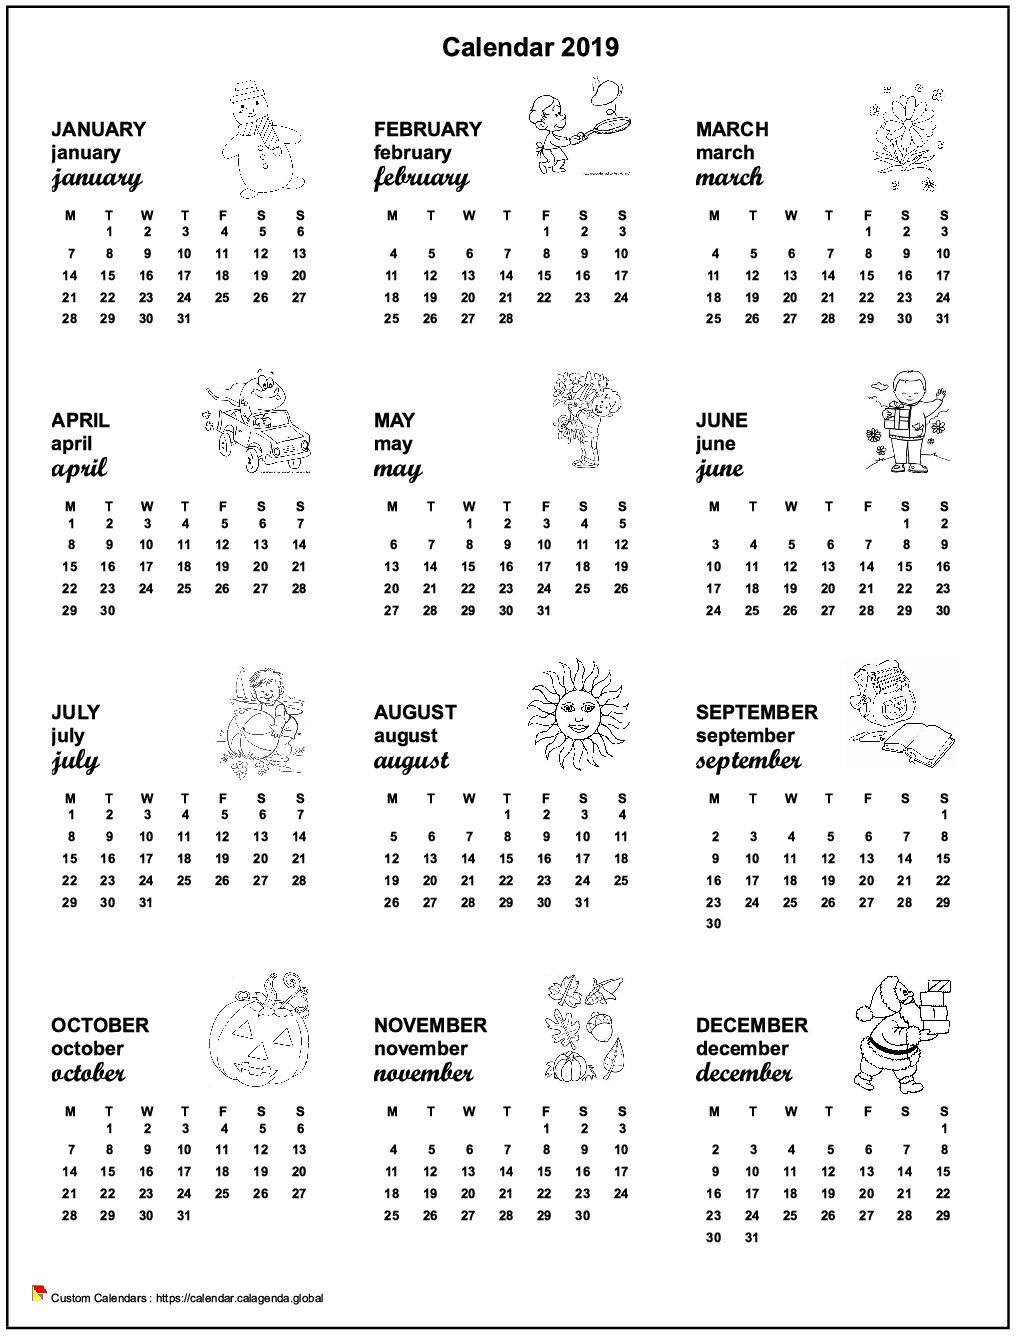 Calendar 2079 annual maternal and primary school